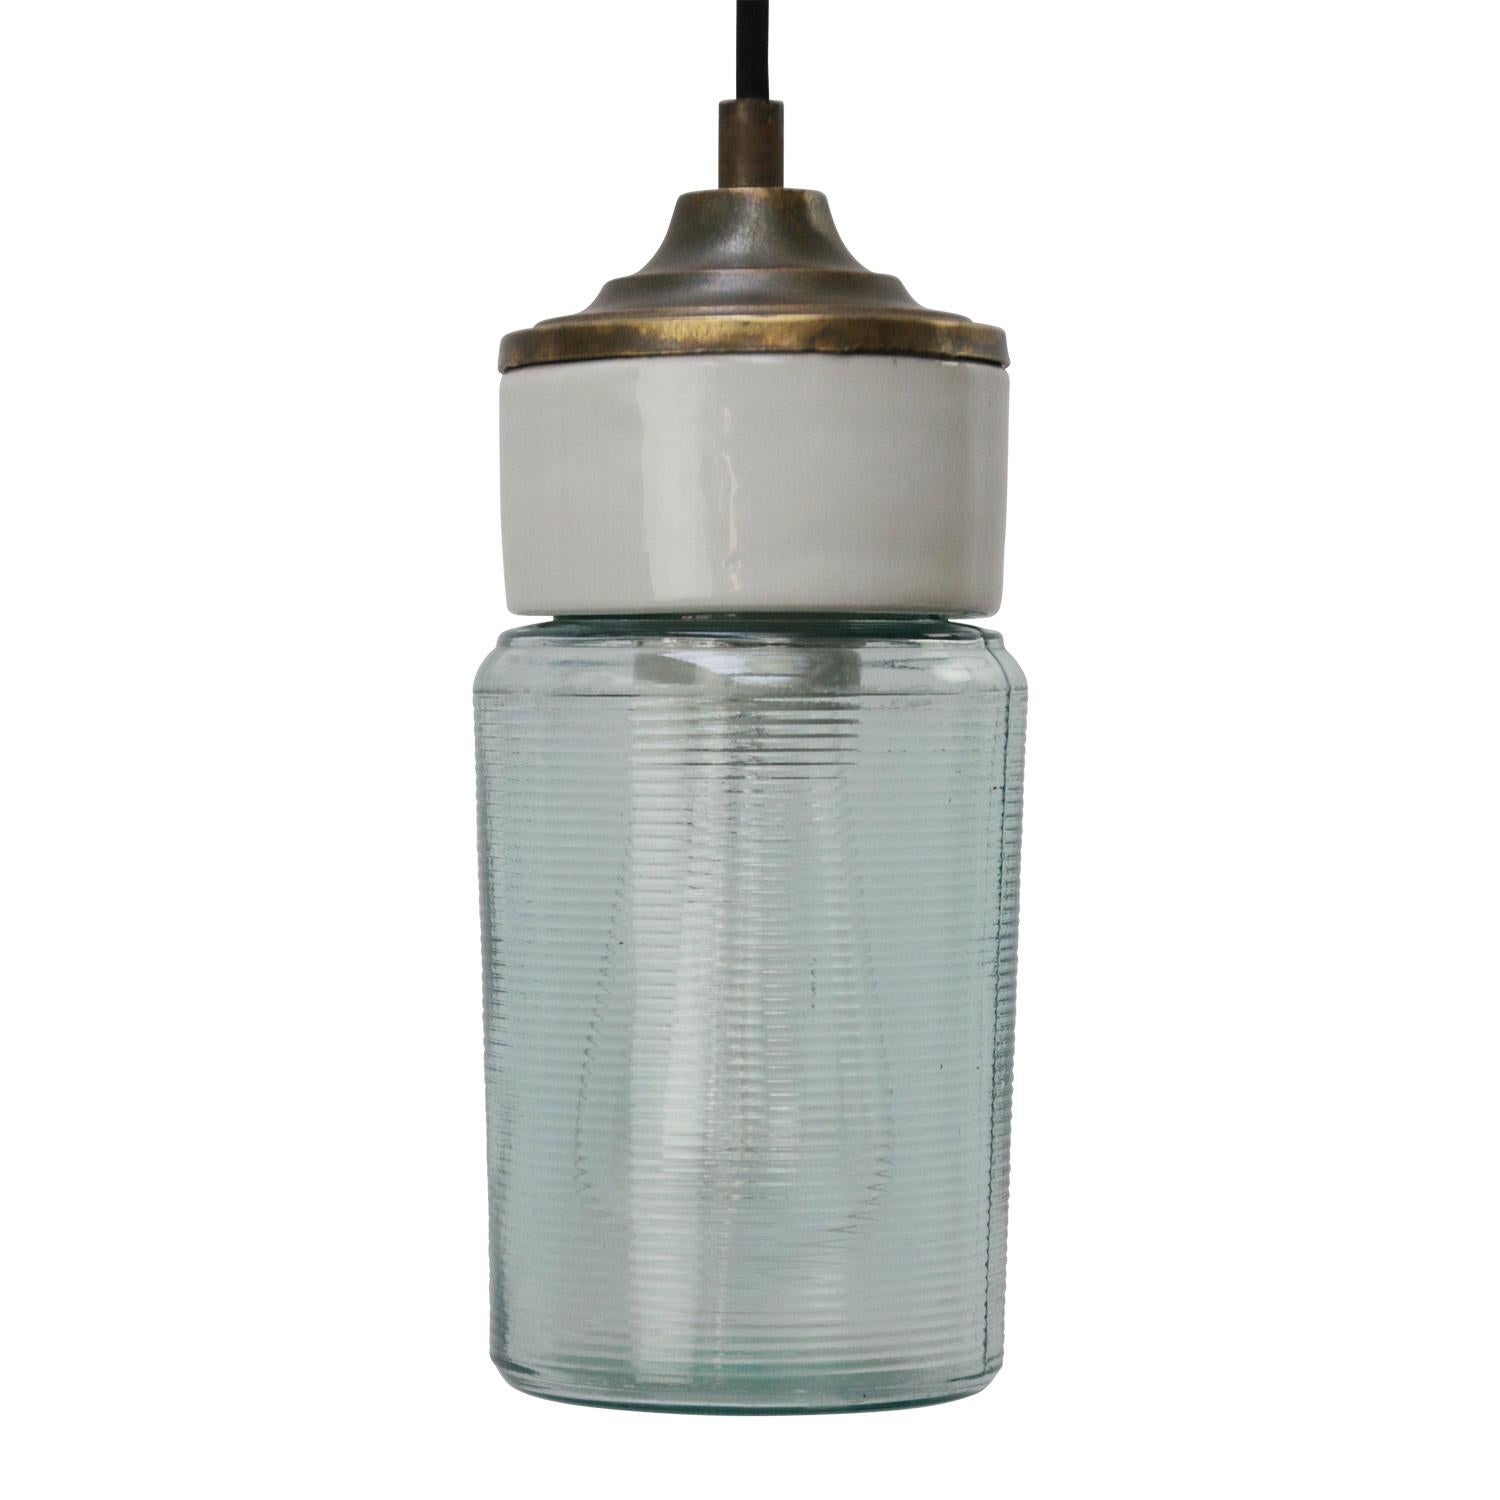 Porcelain industrial hanging lamp.
White porcelain, brass and clear striped glass.
2 conductors, no ground.

Weight: 1.50 kg / 3.3 lb

Priced per individual item. All lamps have been made suitable by international standards for incandescent